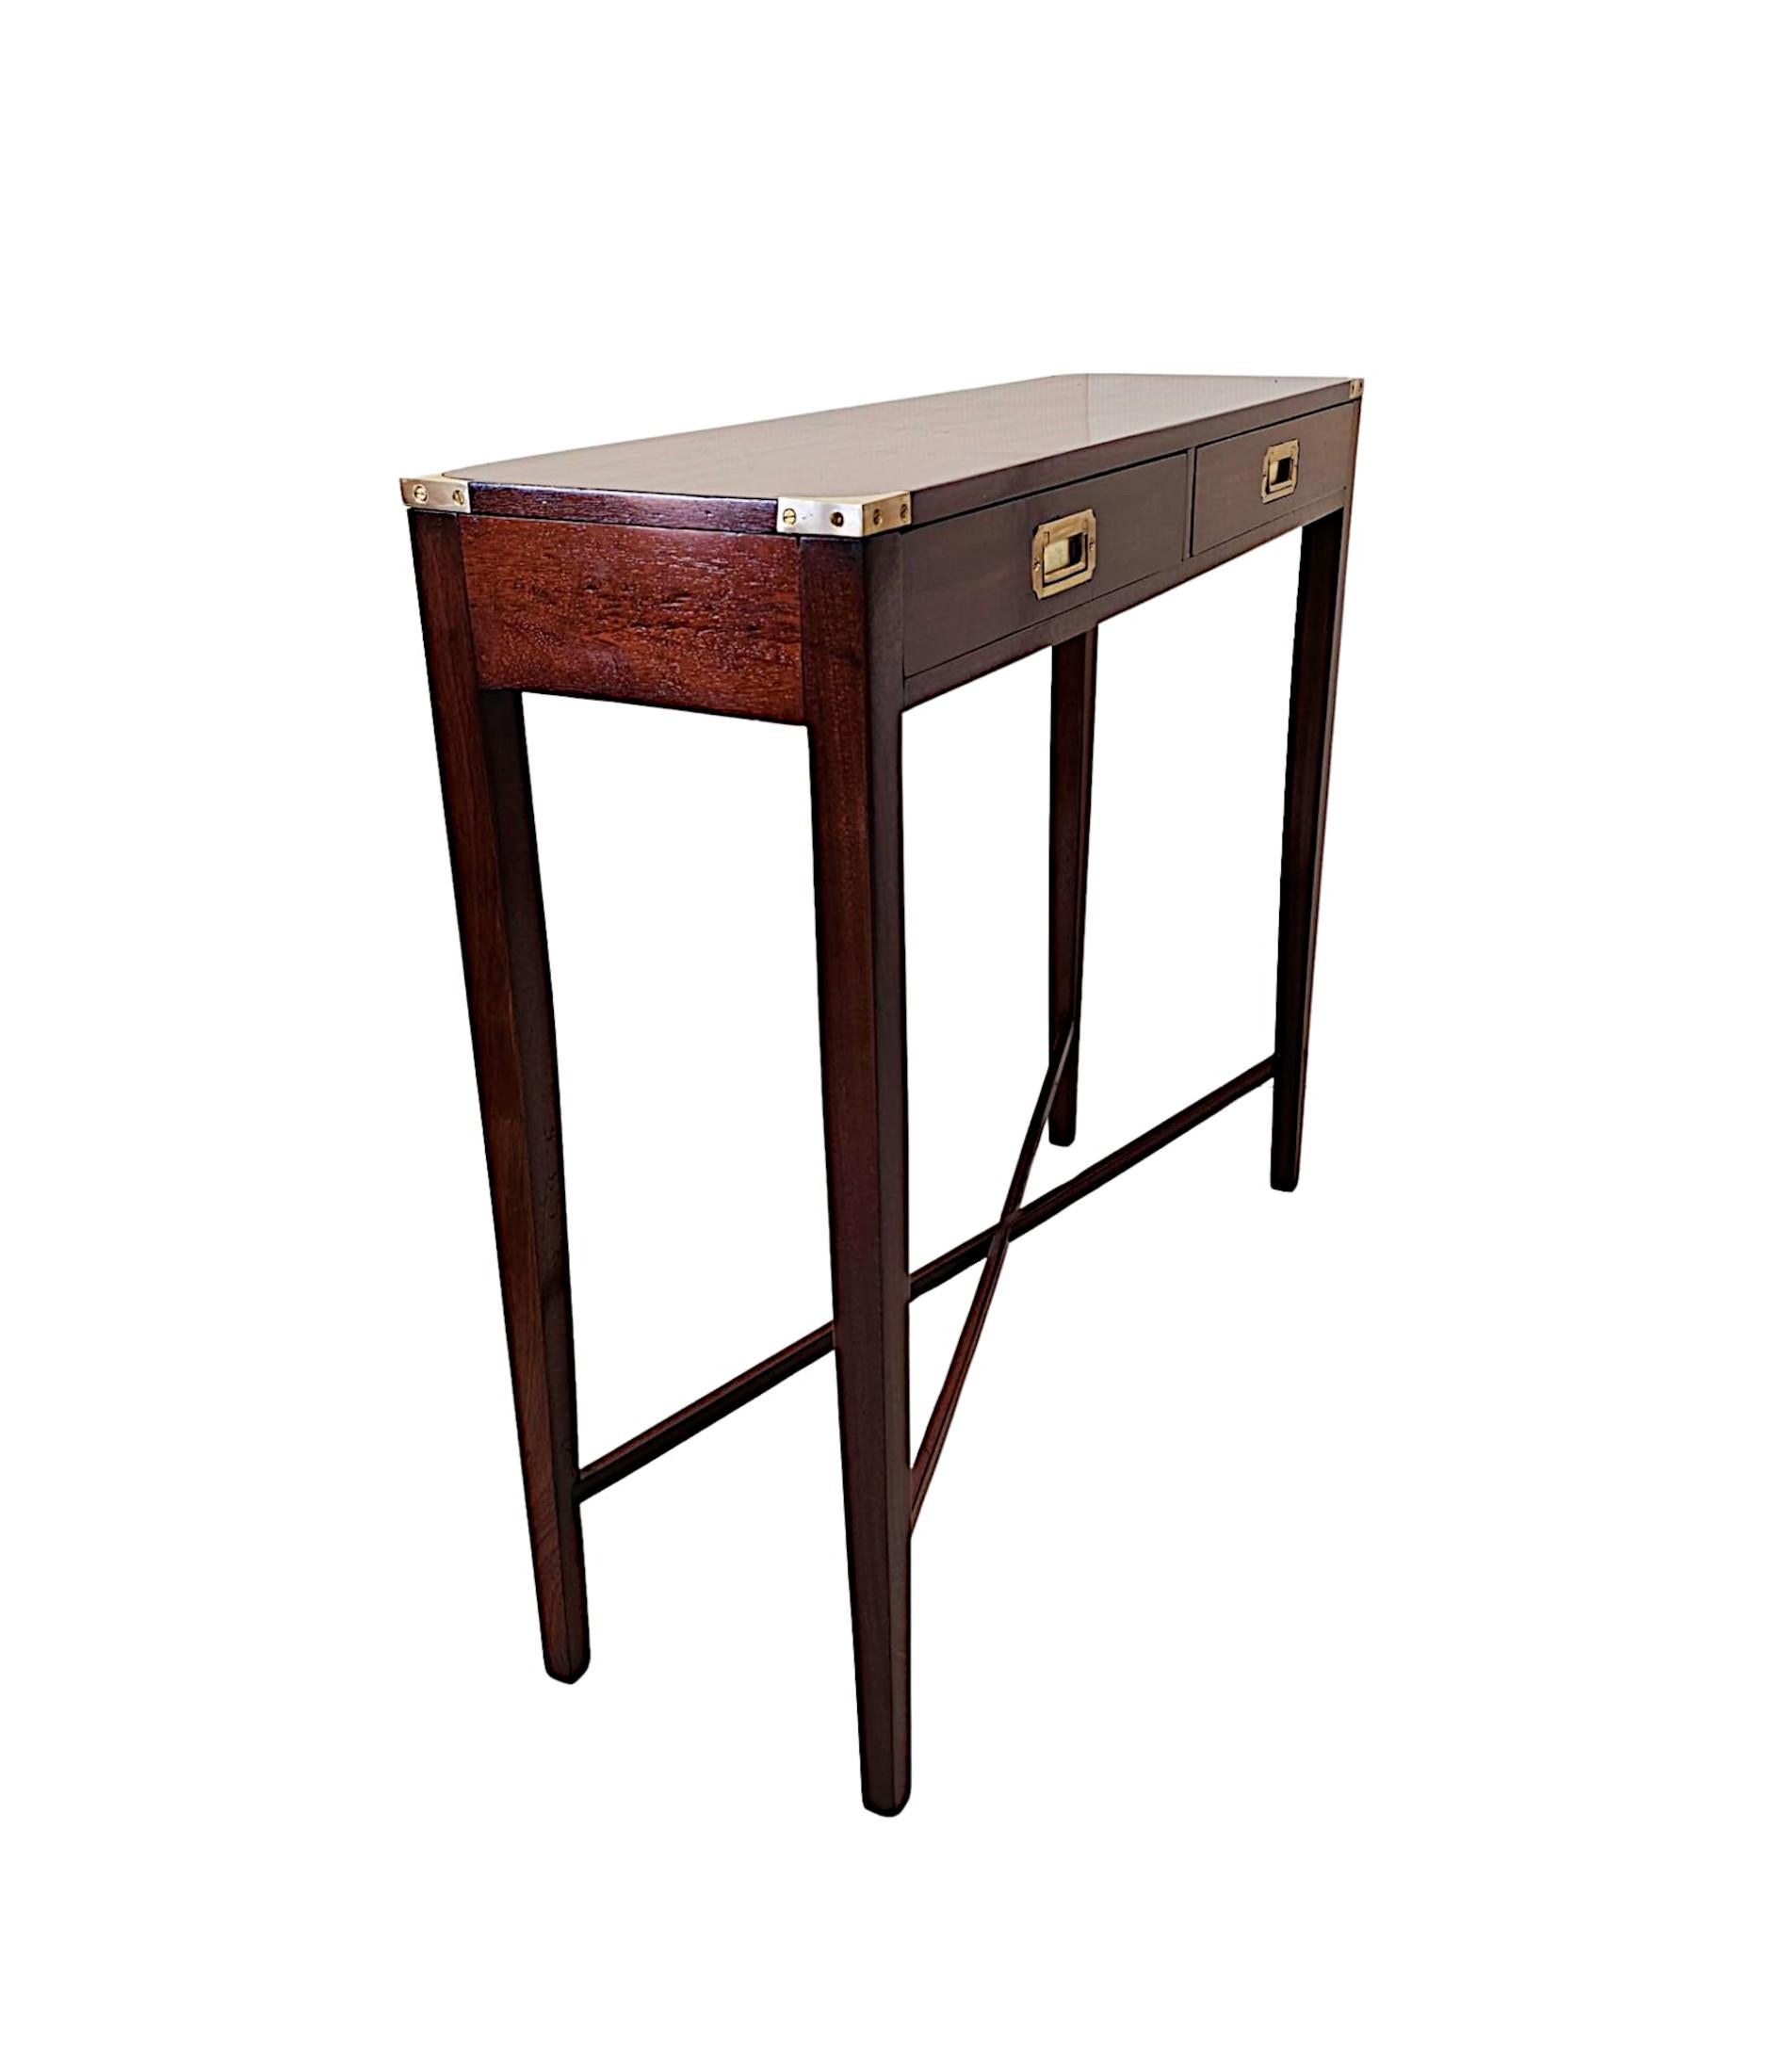 A fine 20th Century mahogany campaign style console table of exceptional quality, finely handmade, brass mounted throughout and with rich patination and grain to the wood.  The well figured, moulded top of rectangular form is fitted with decorative